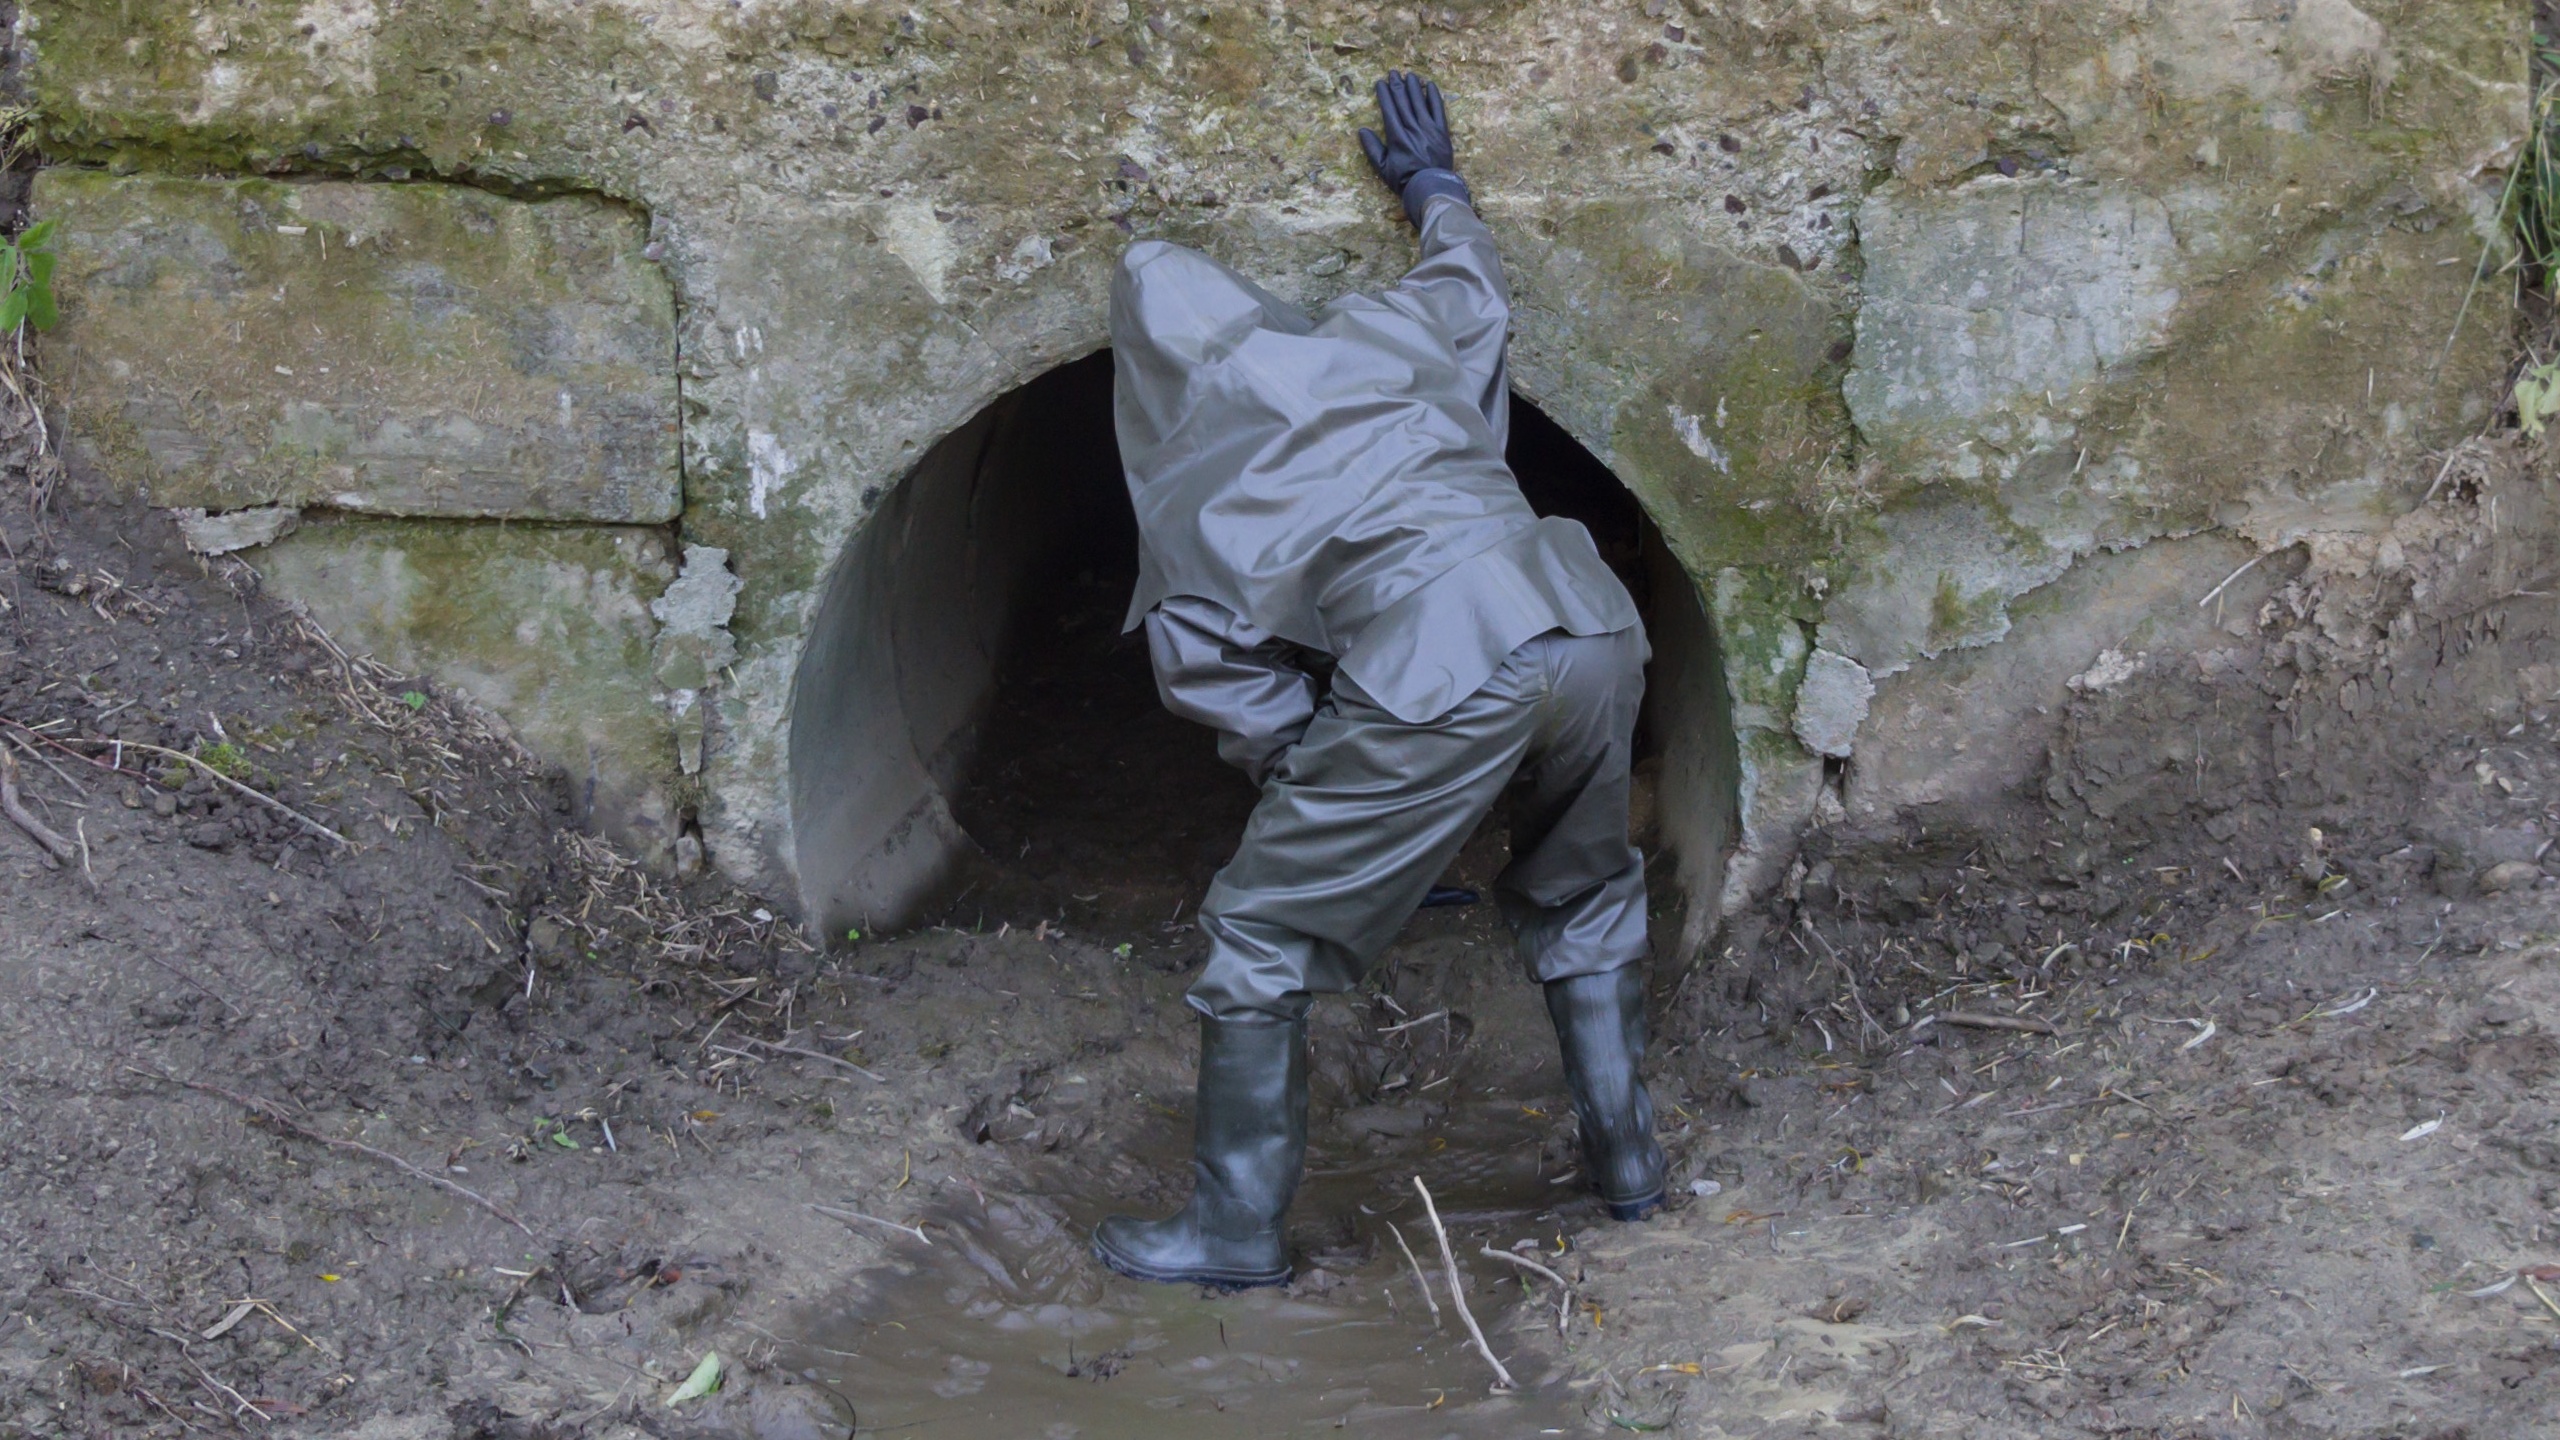 Crossing muddy tunnel in rubber suit